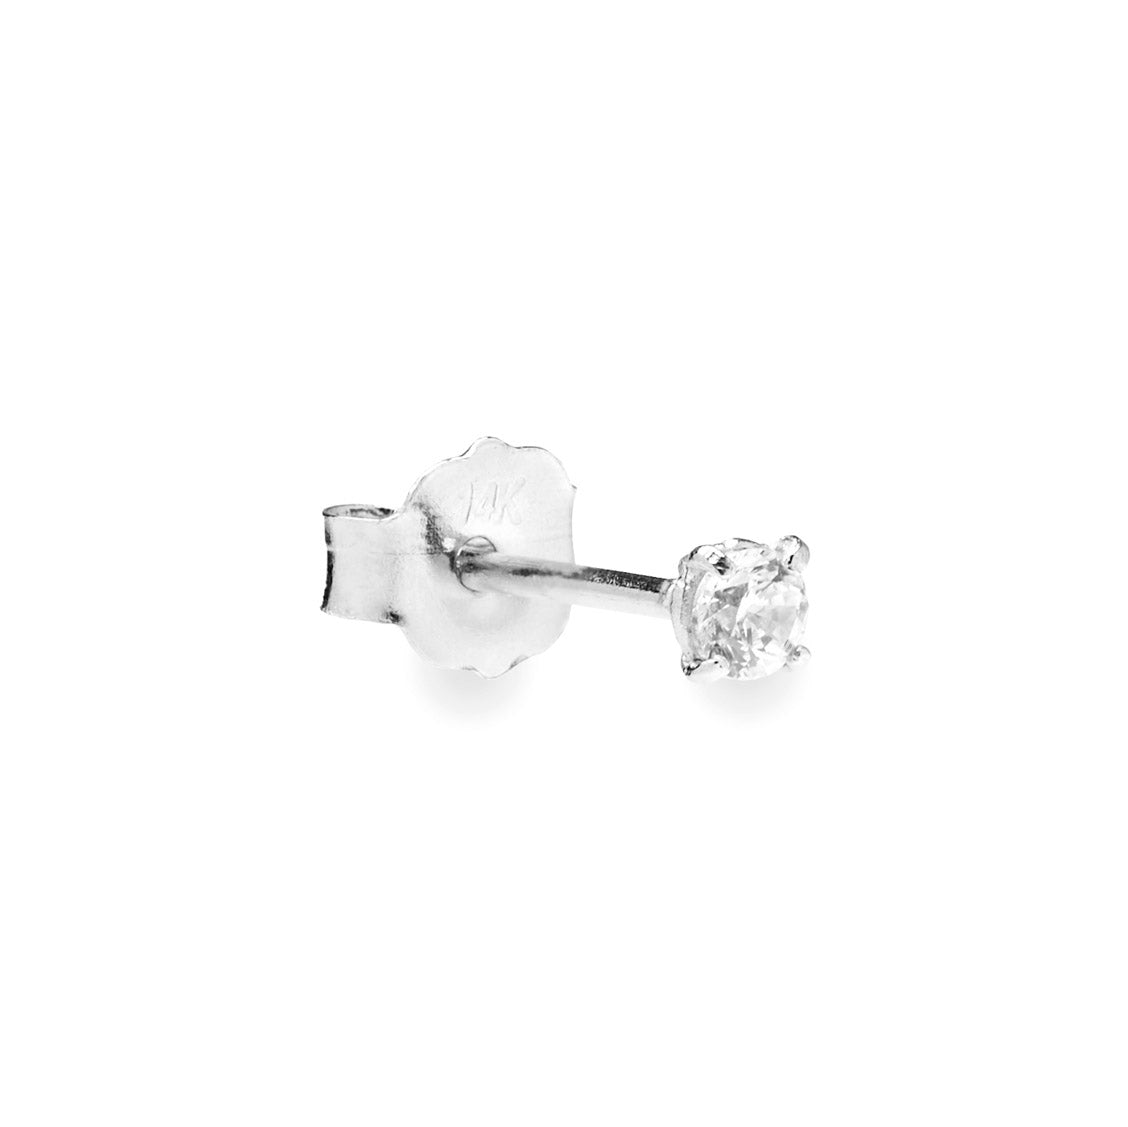 Brilliante tiny 14k solid white gold single stud earring with solitaire stone - Helix & Conch